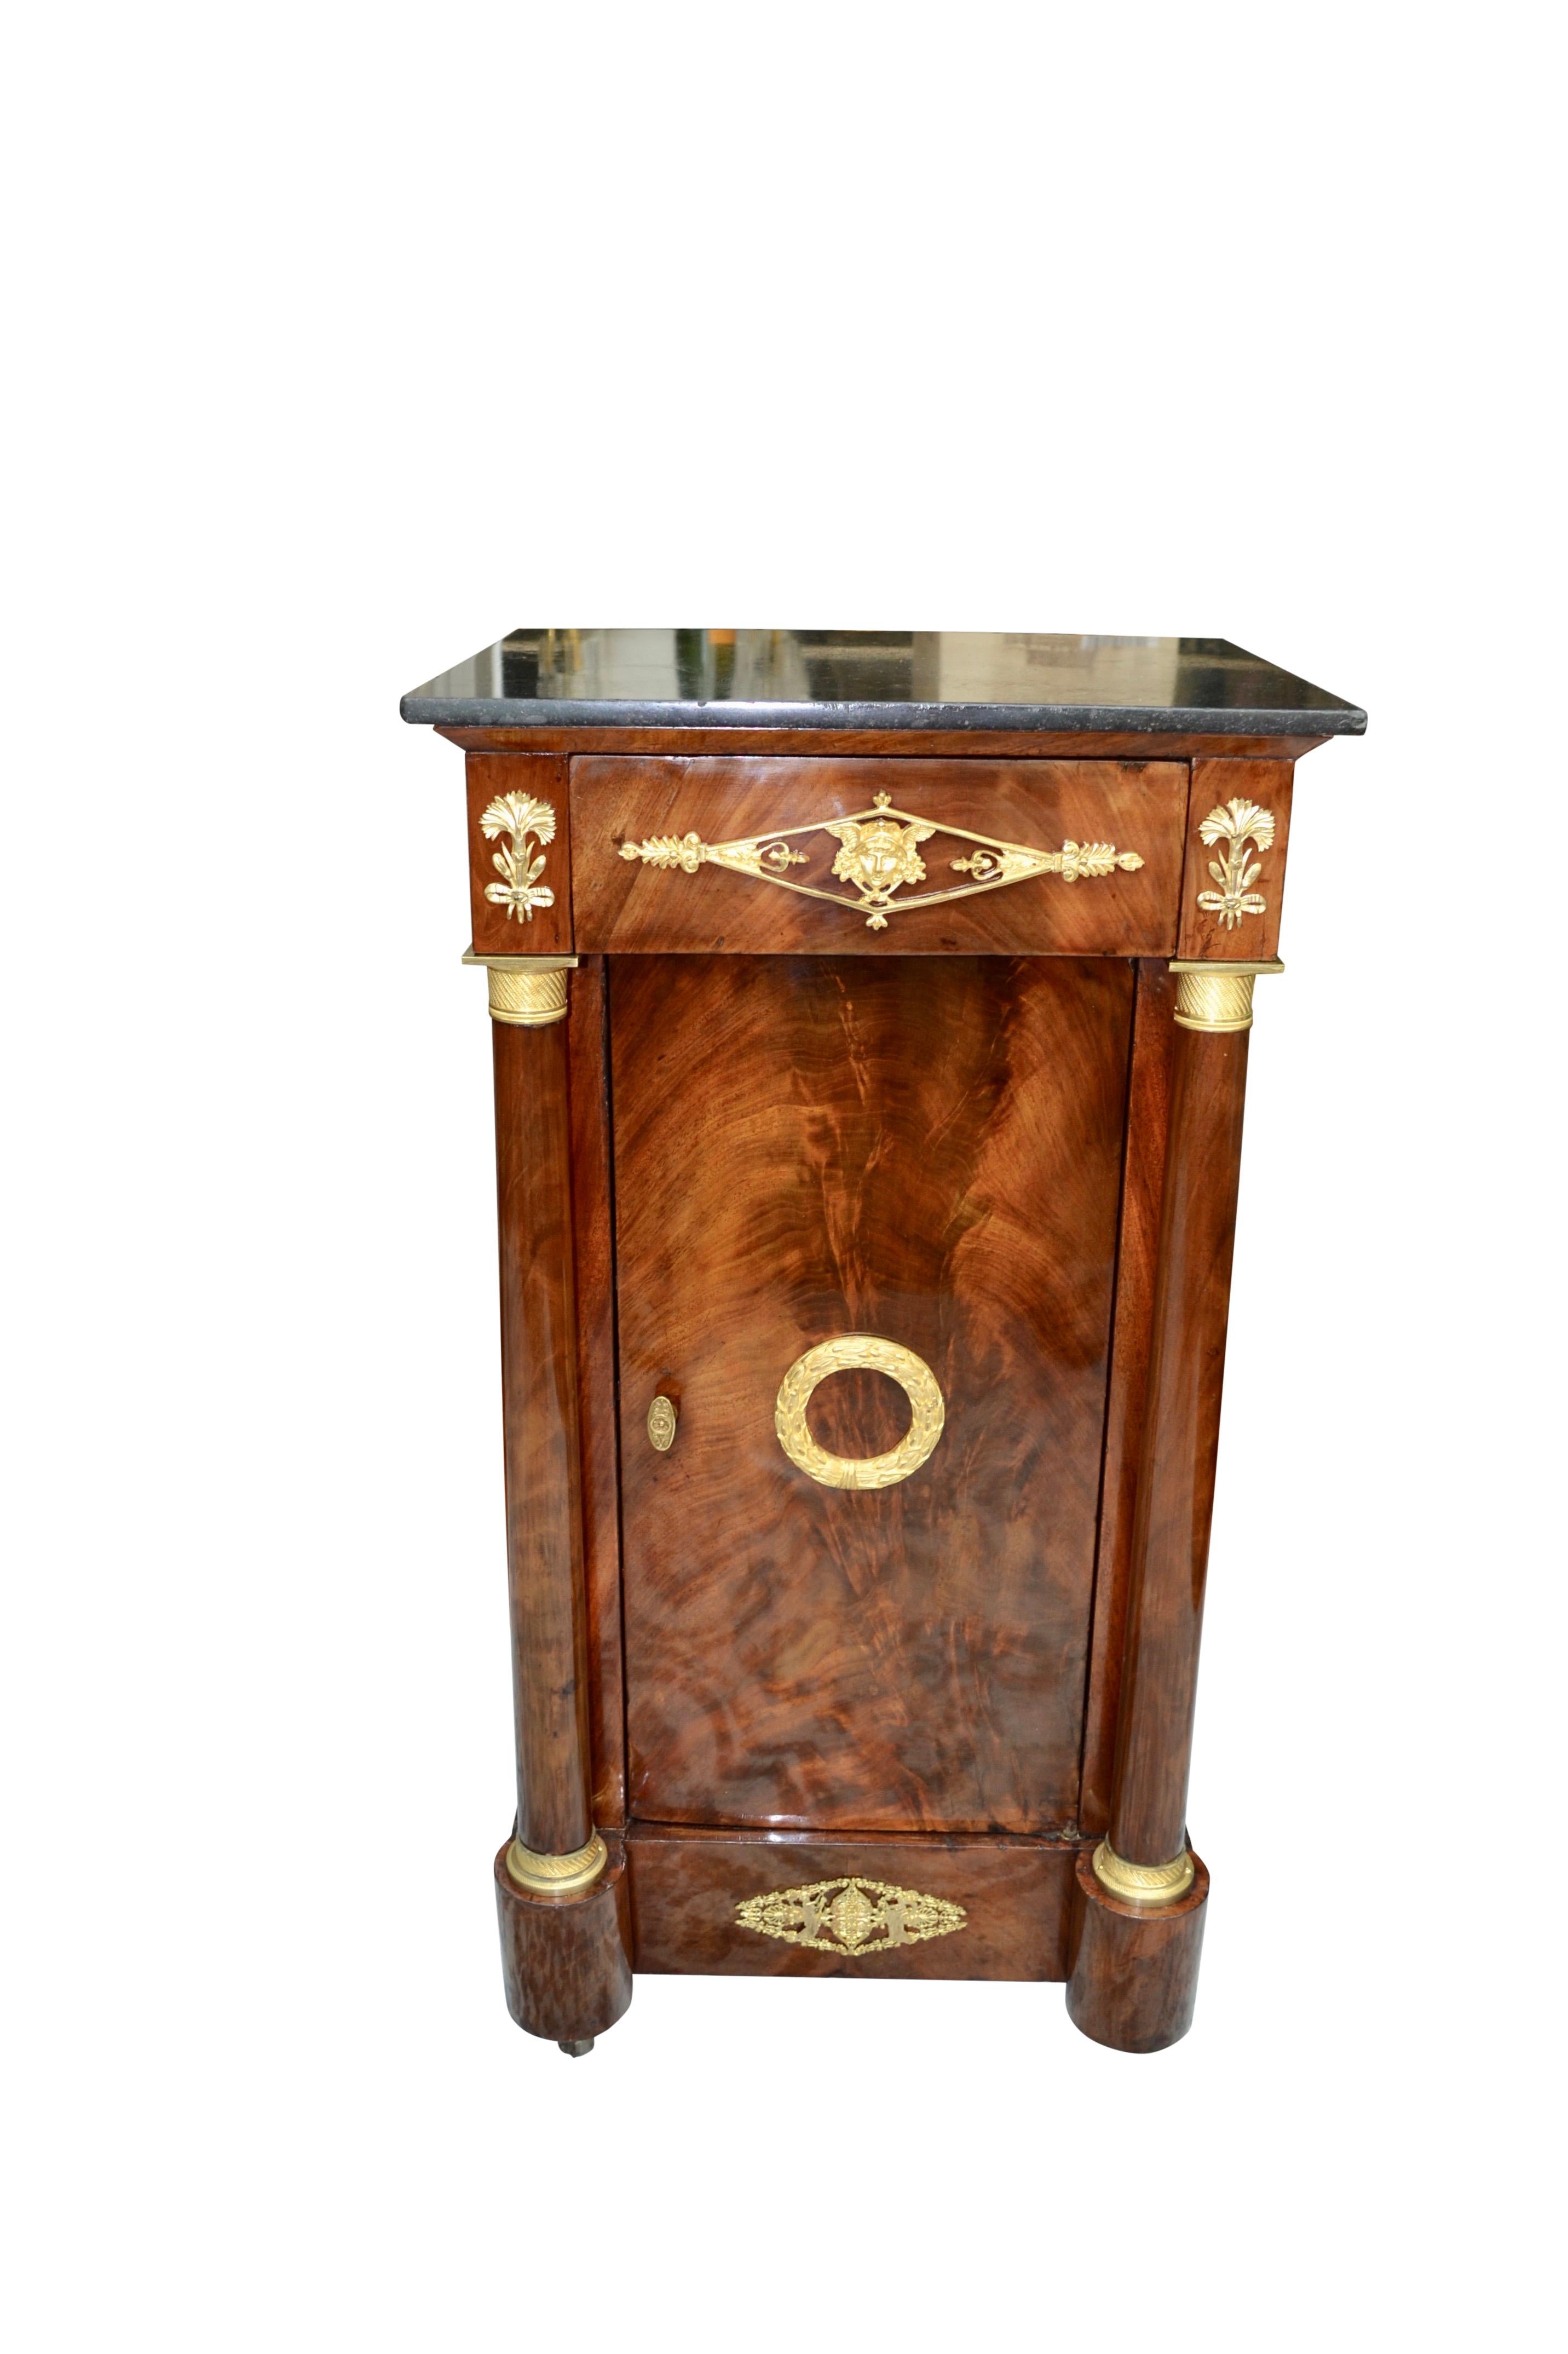 A beautifully veined mahogany bedside table (referred to as a Somno), which was a popular piece of furniture during the French Empire period. There is a single top drawer below a fixed grey black marble top, which is flanked by two turned mahogany